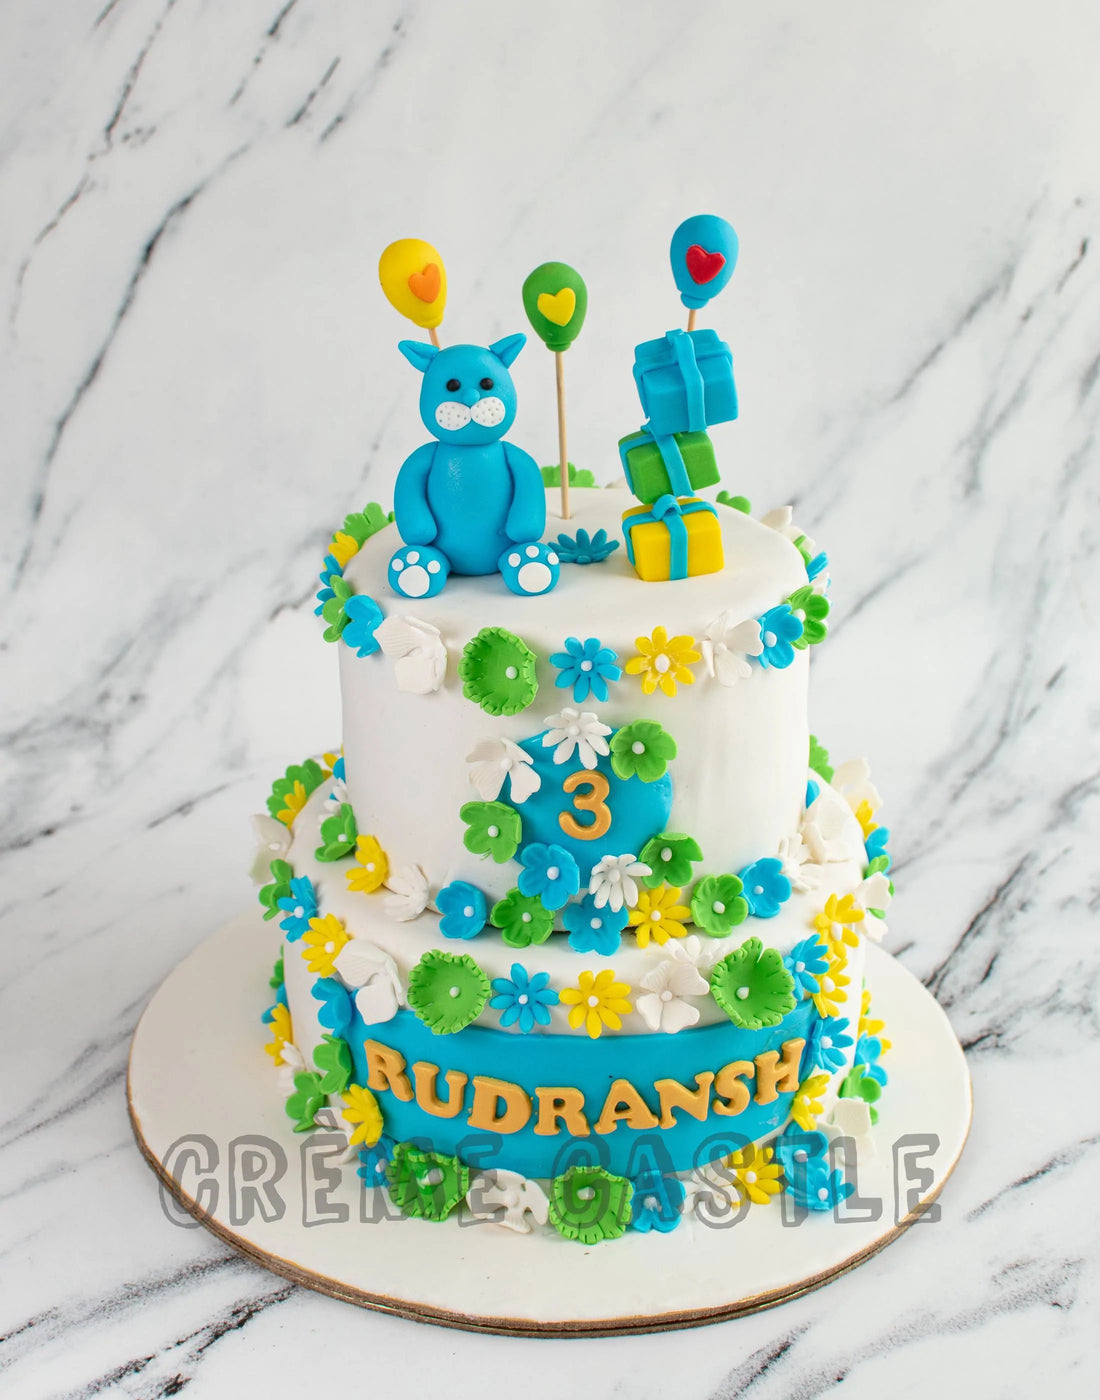 Bear and Presents Design Cake